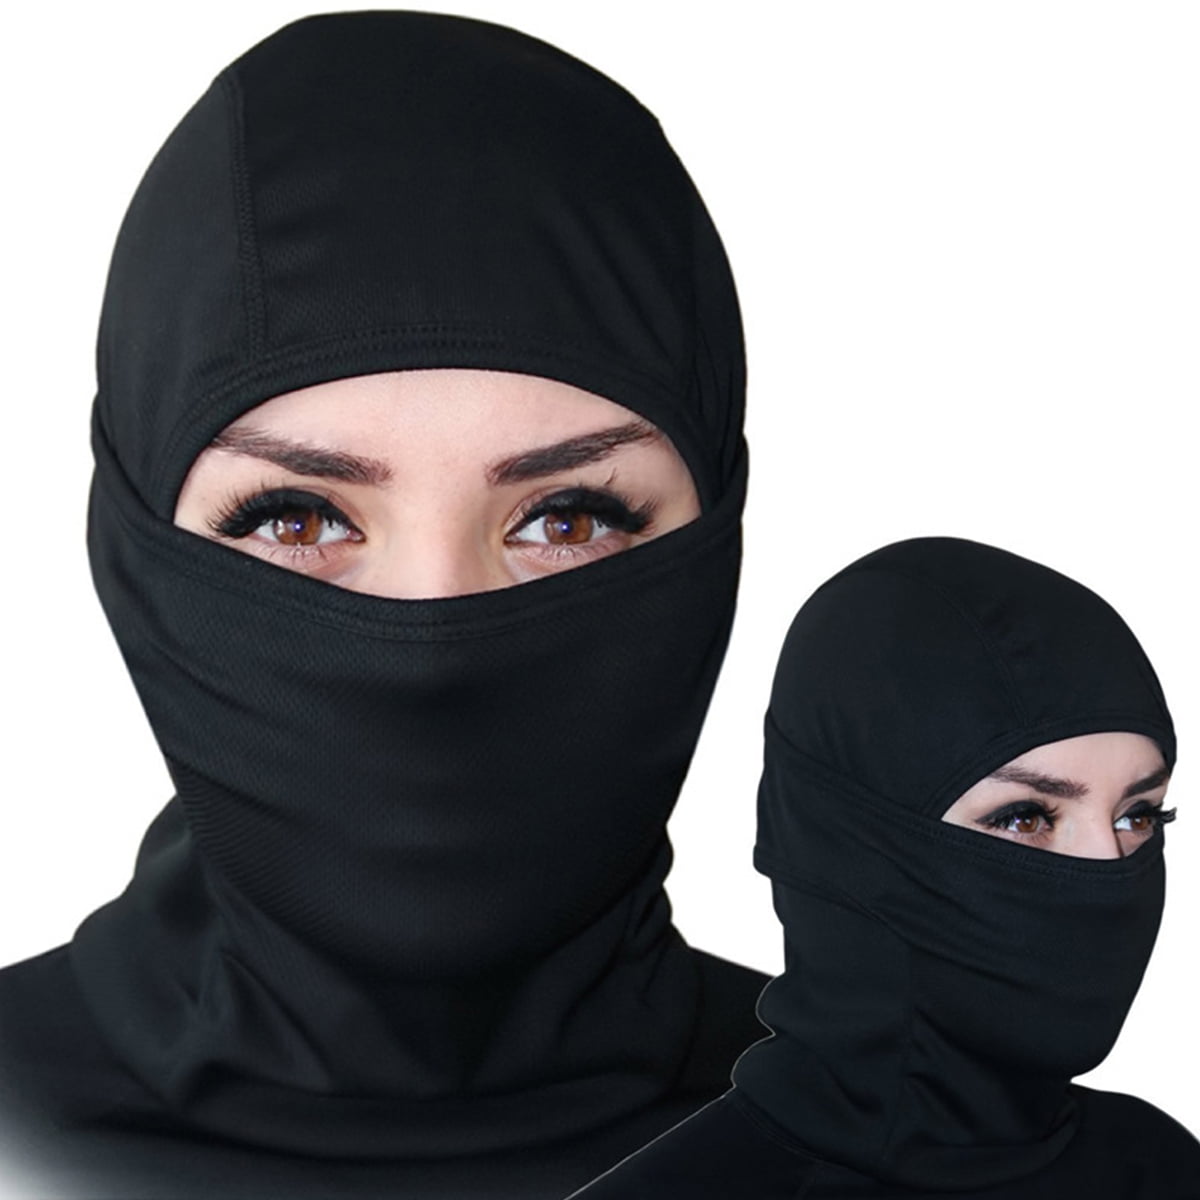 Balaclava Face Mask Men Breathable Head Cover Women for Sports Outdoor Cycling 